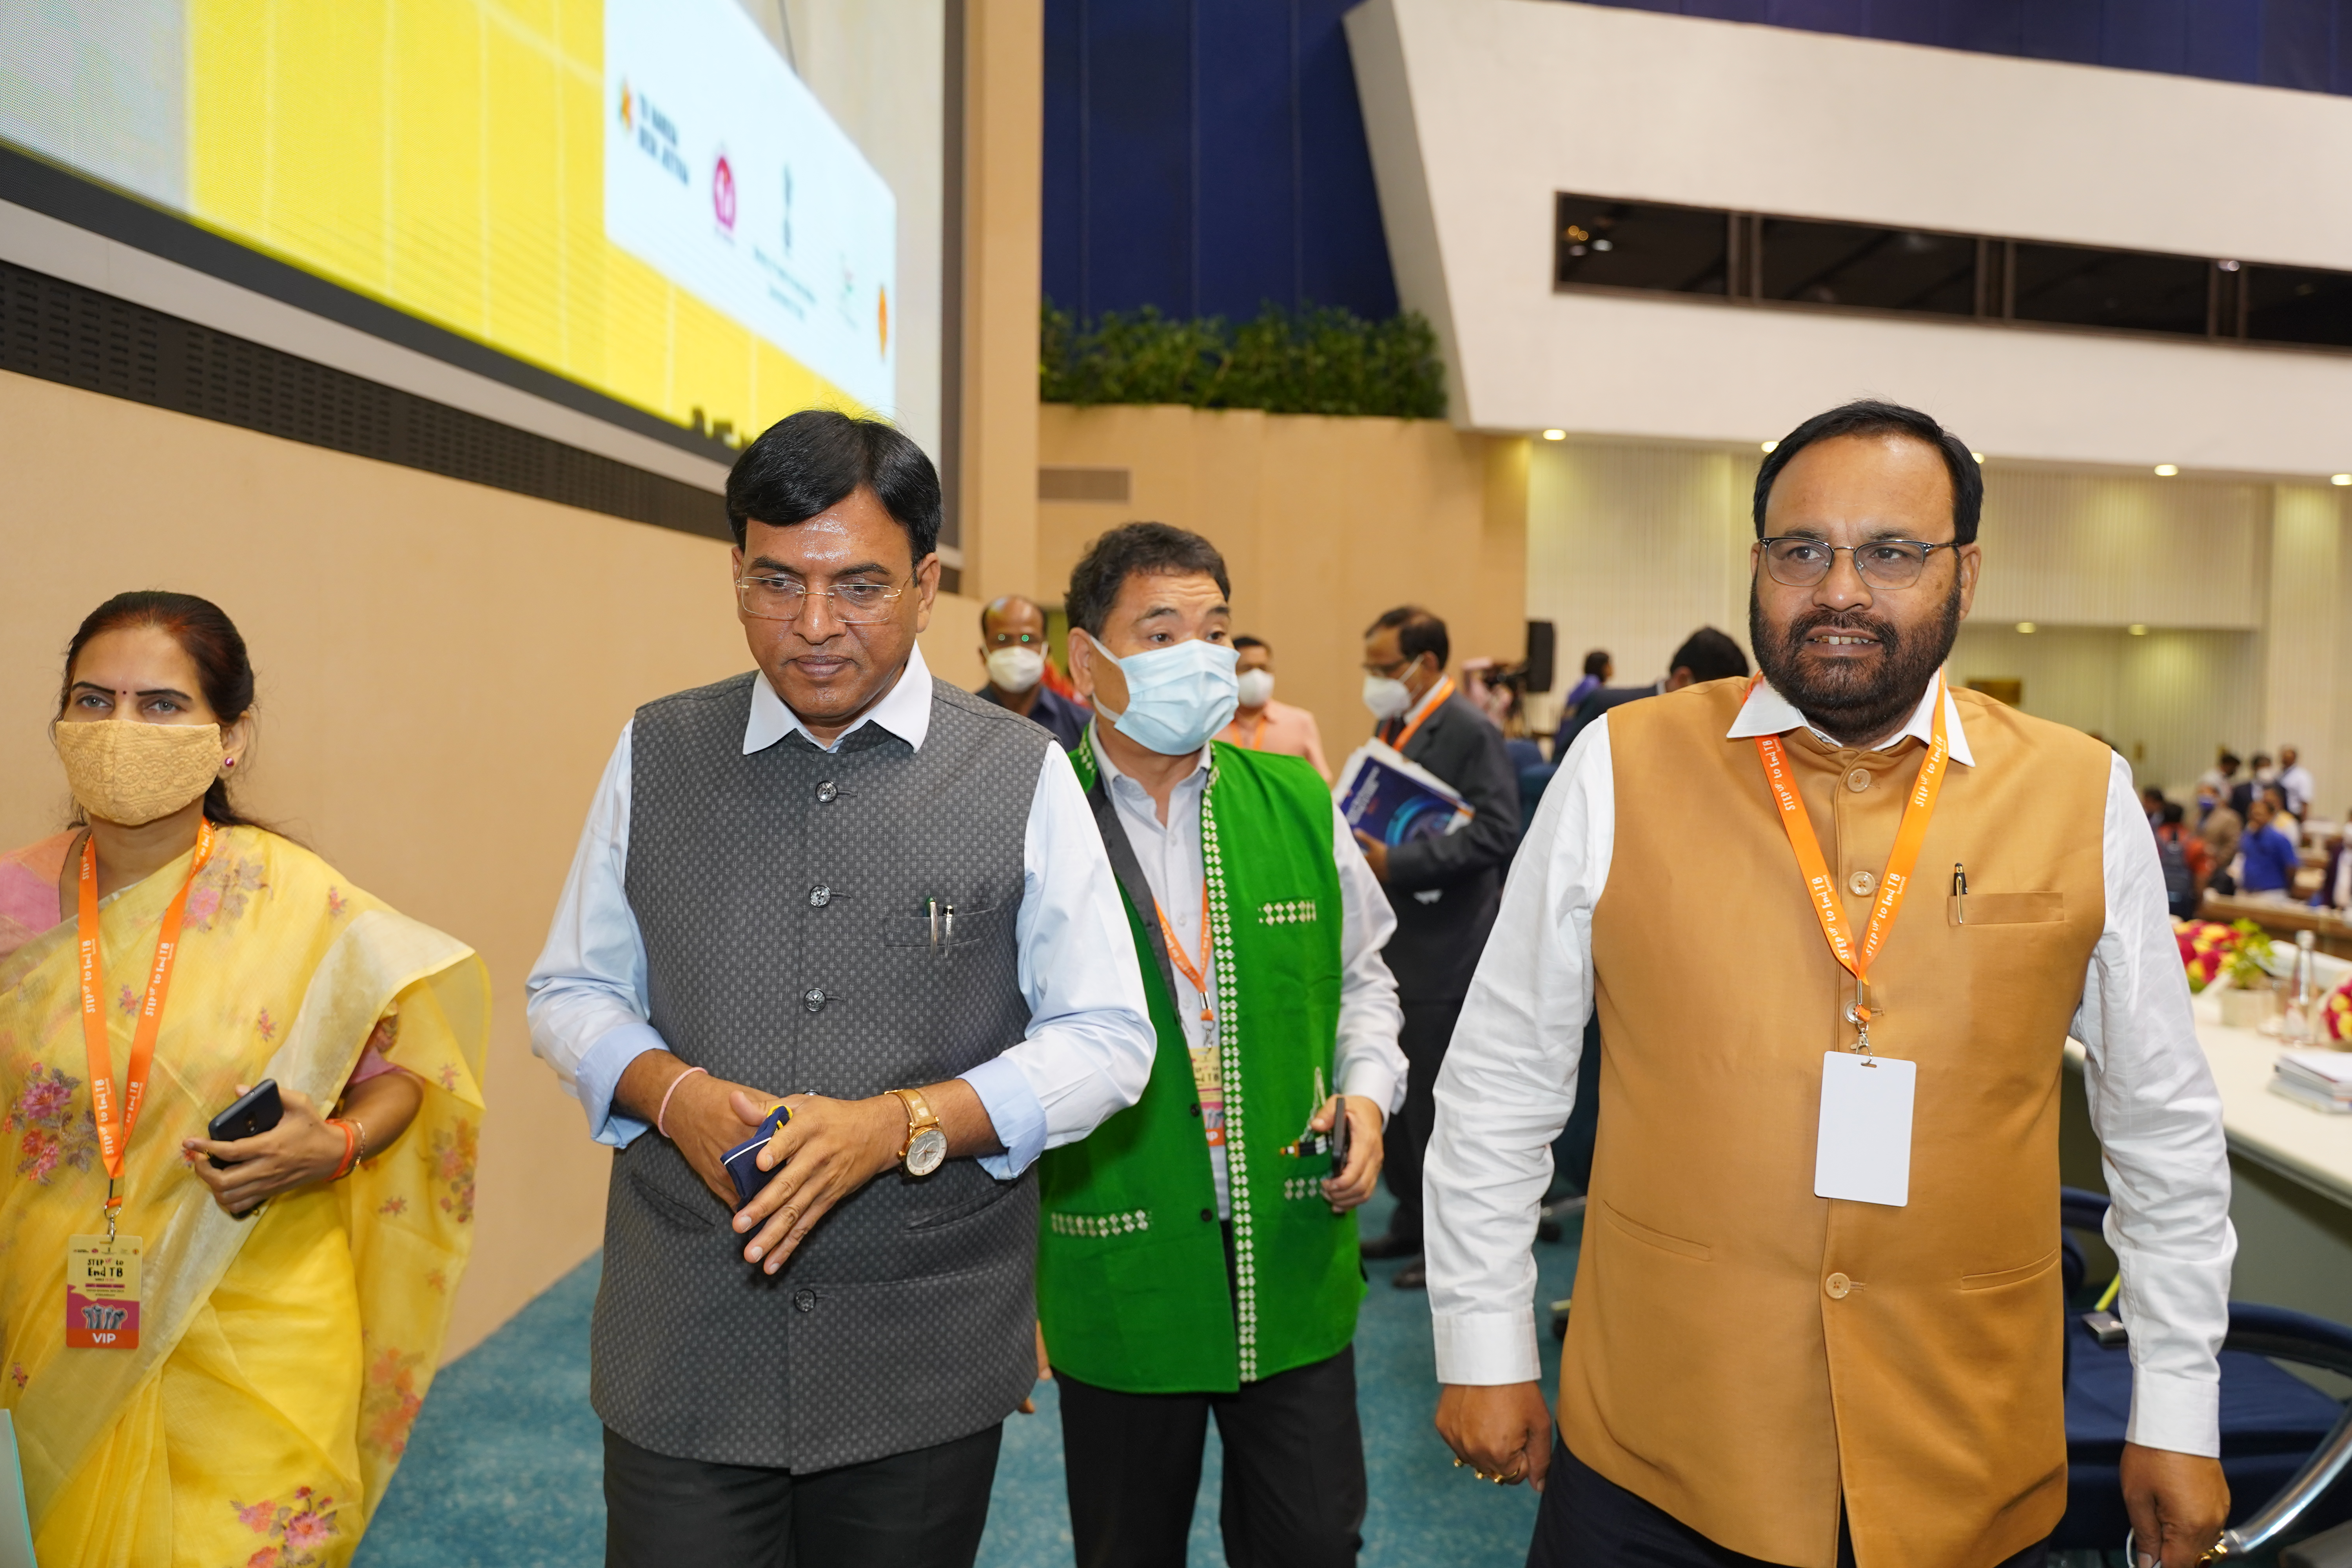 Hon'ble Union Minister, Minister of State Health & Family Welfare along with Hon'ble Health Minister of Assam & Arunachal Pradesh graced the event